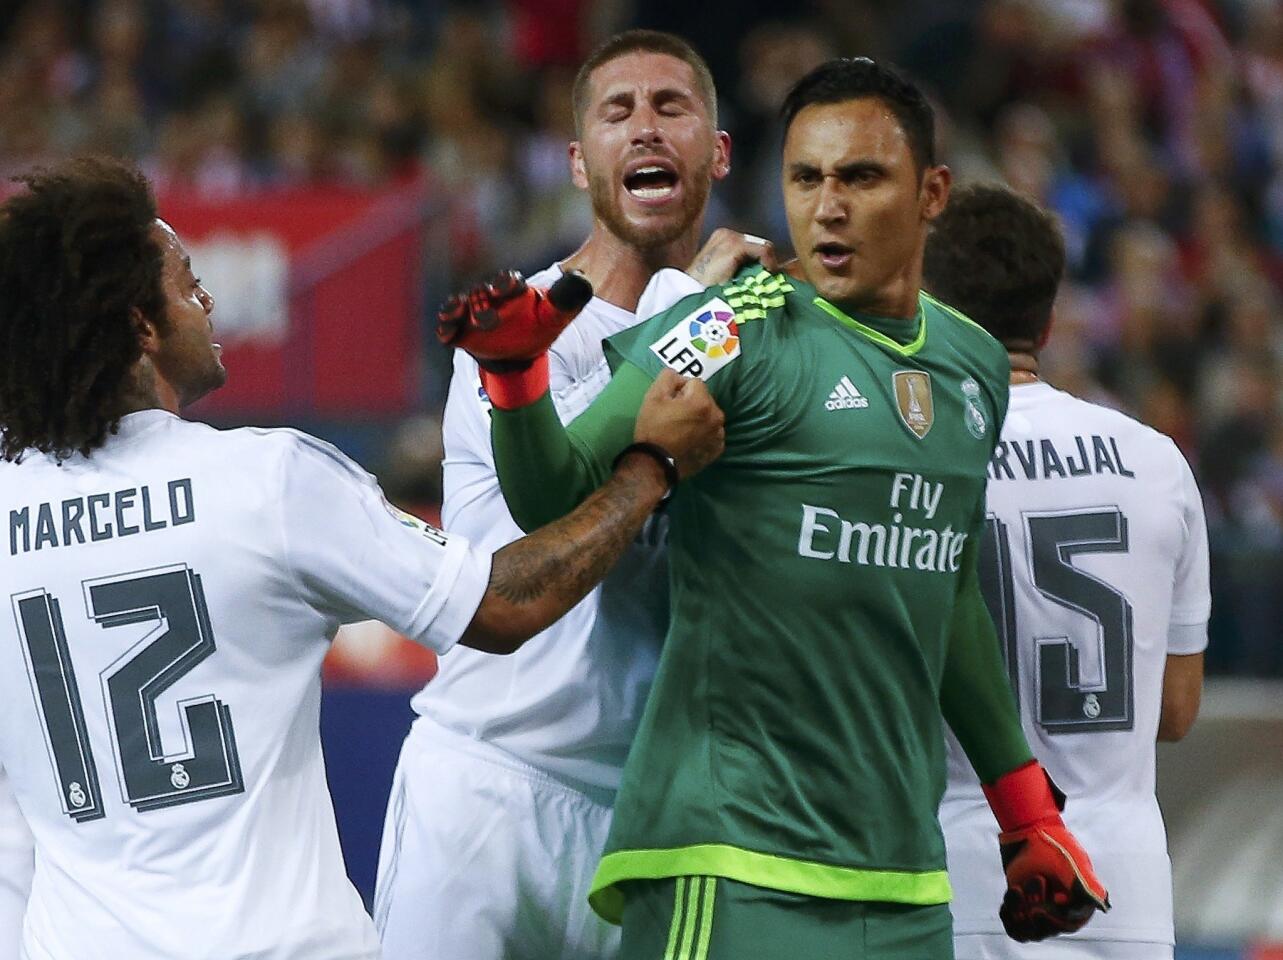 Real Madrid's goalkeeper Keylor Navas is congratulated after saving a penalty kick during their Spanish first division derby soccer match in Madrid